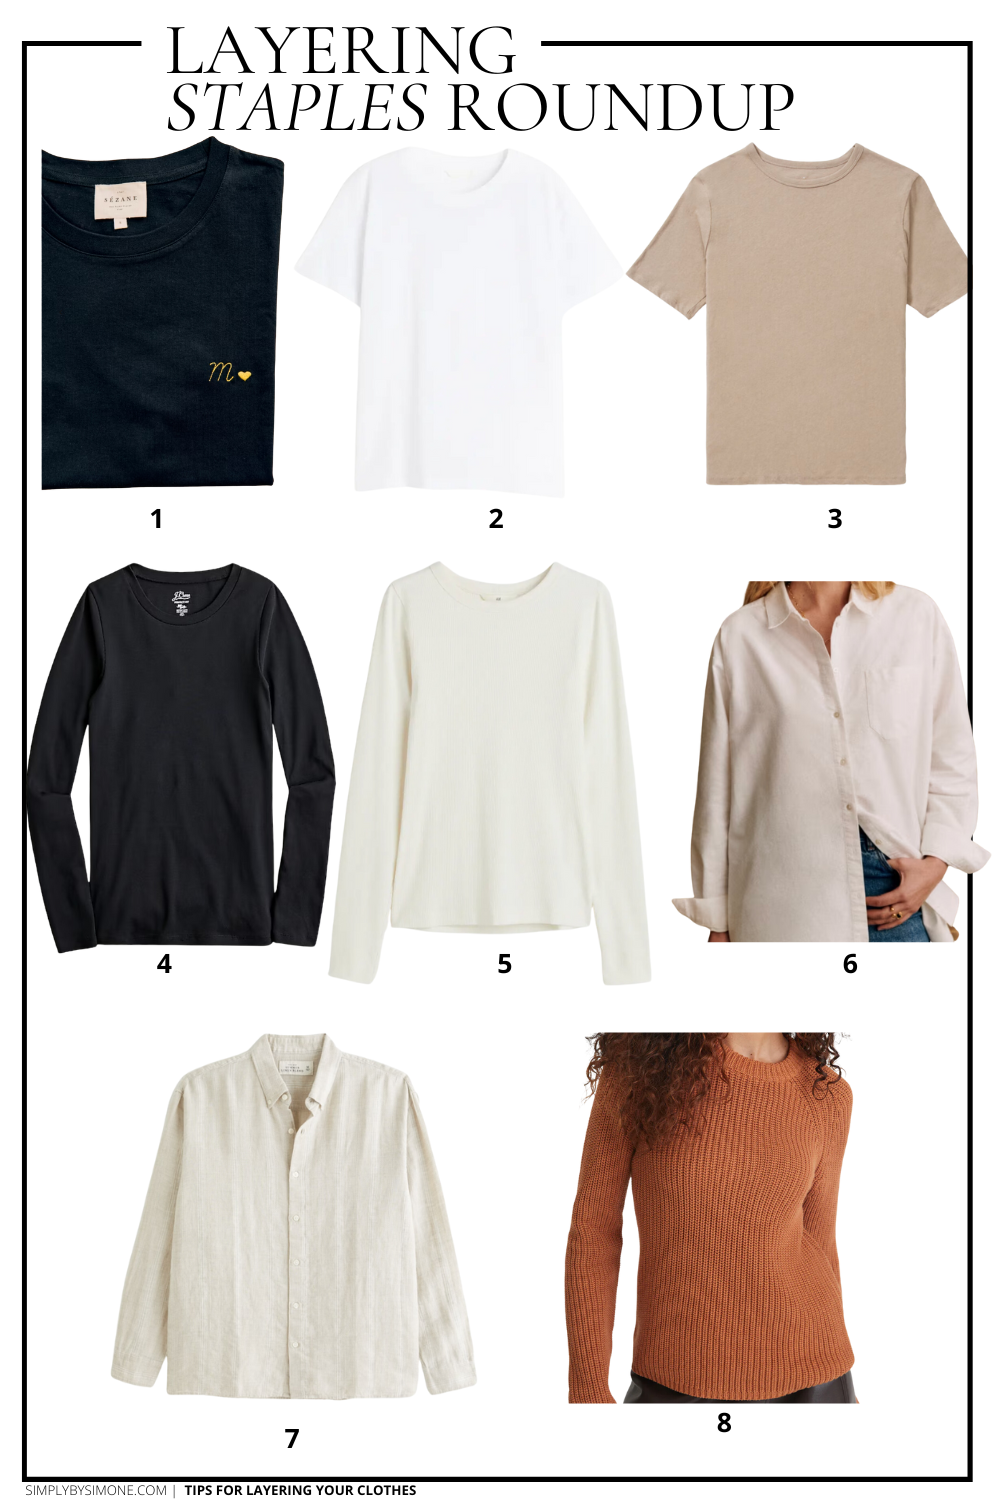 Collage of 8 Items To Use For Layering Your Clothing